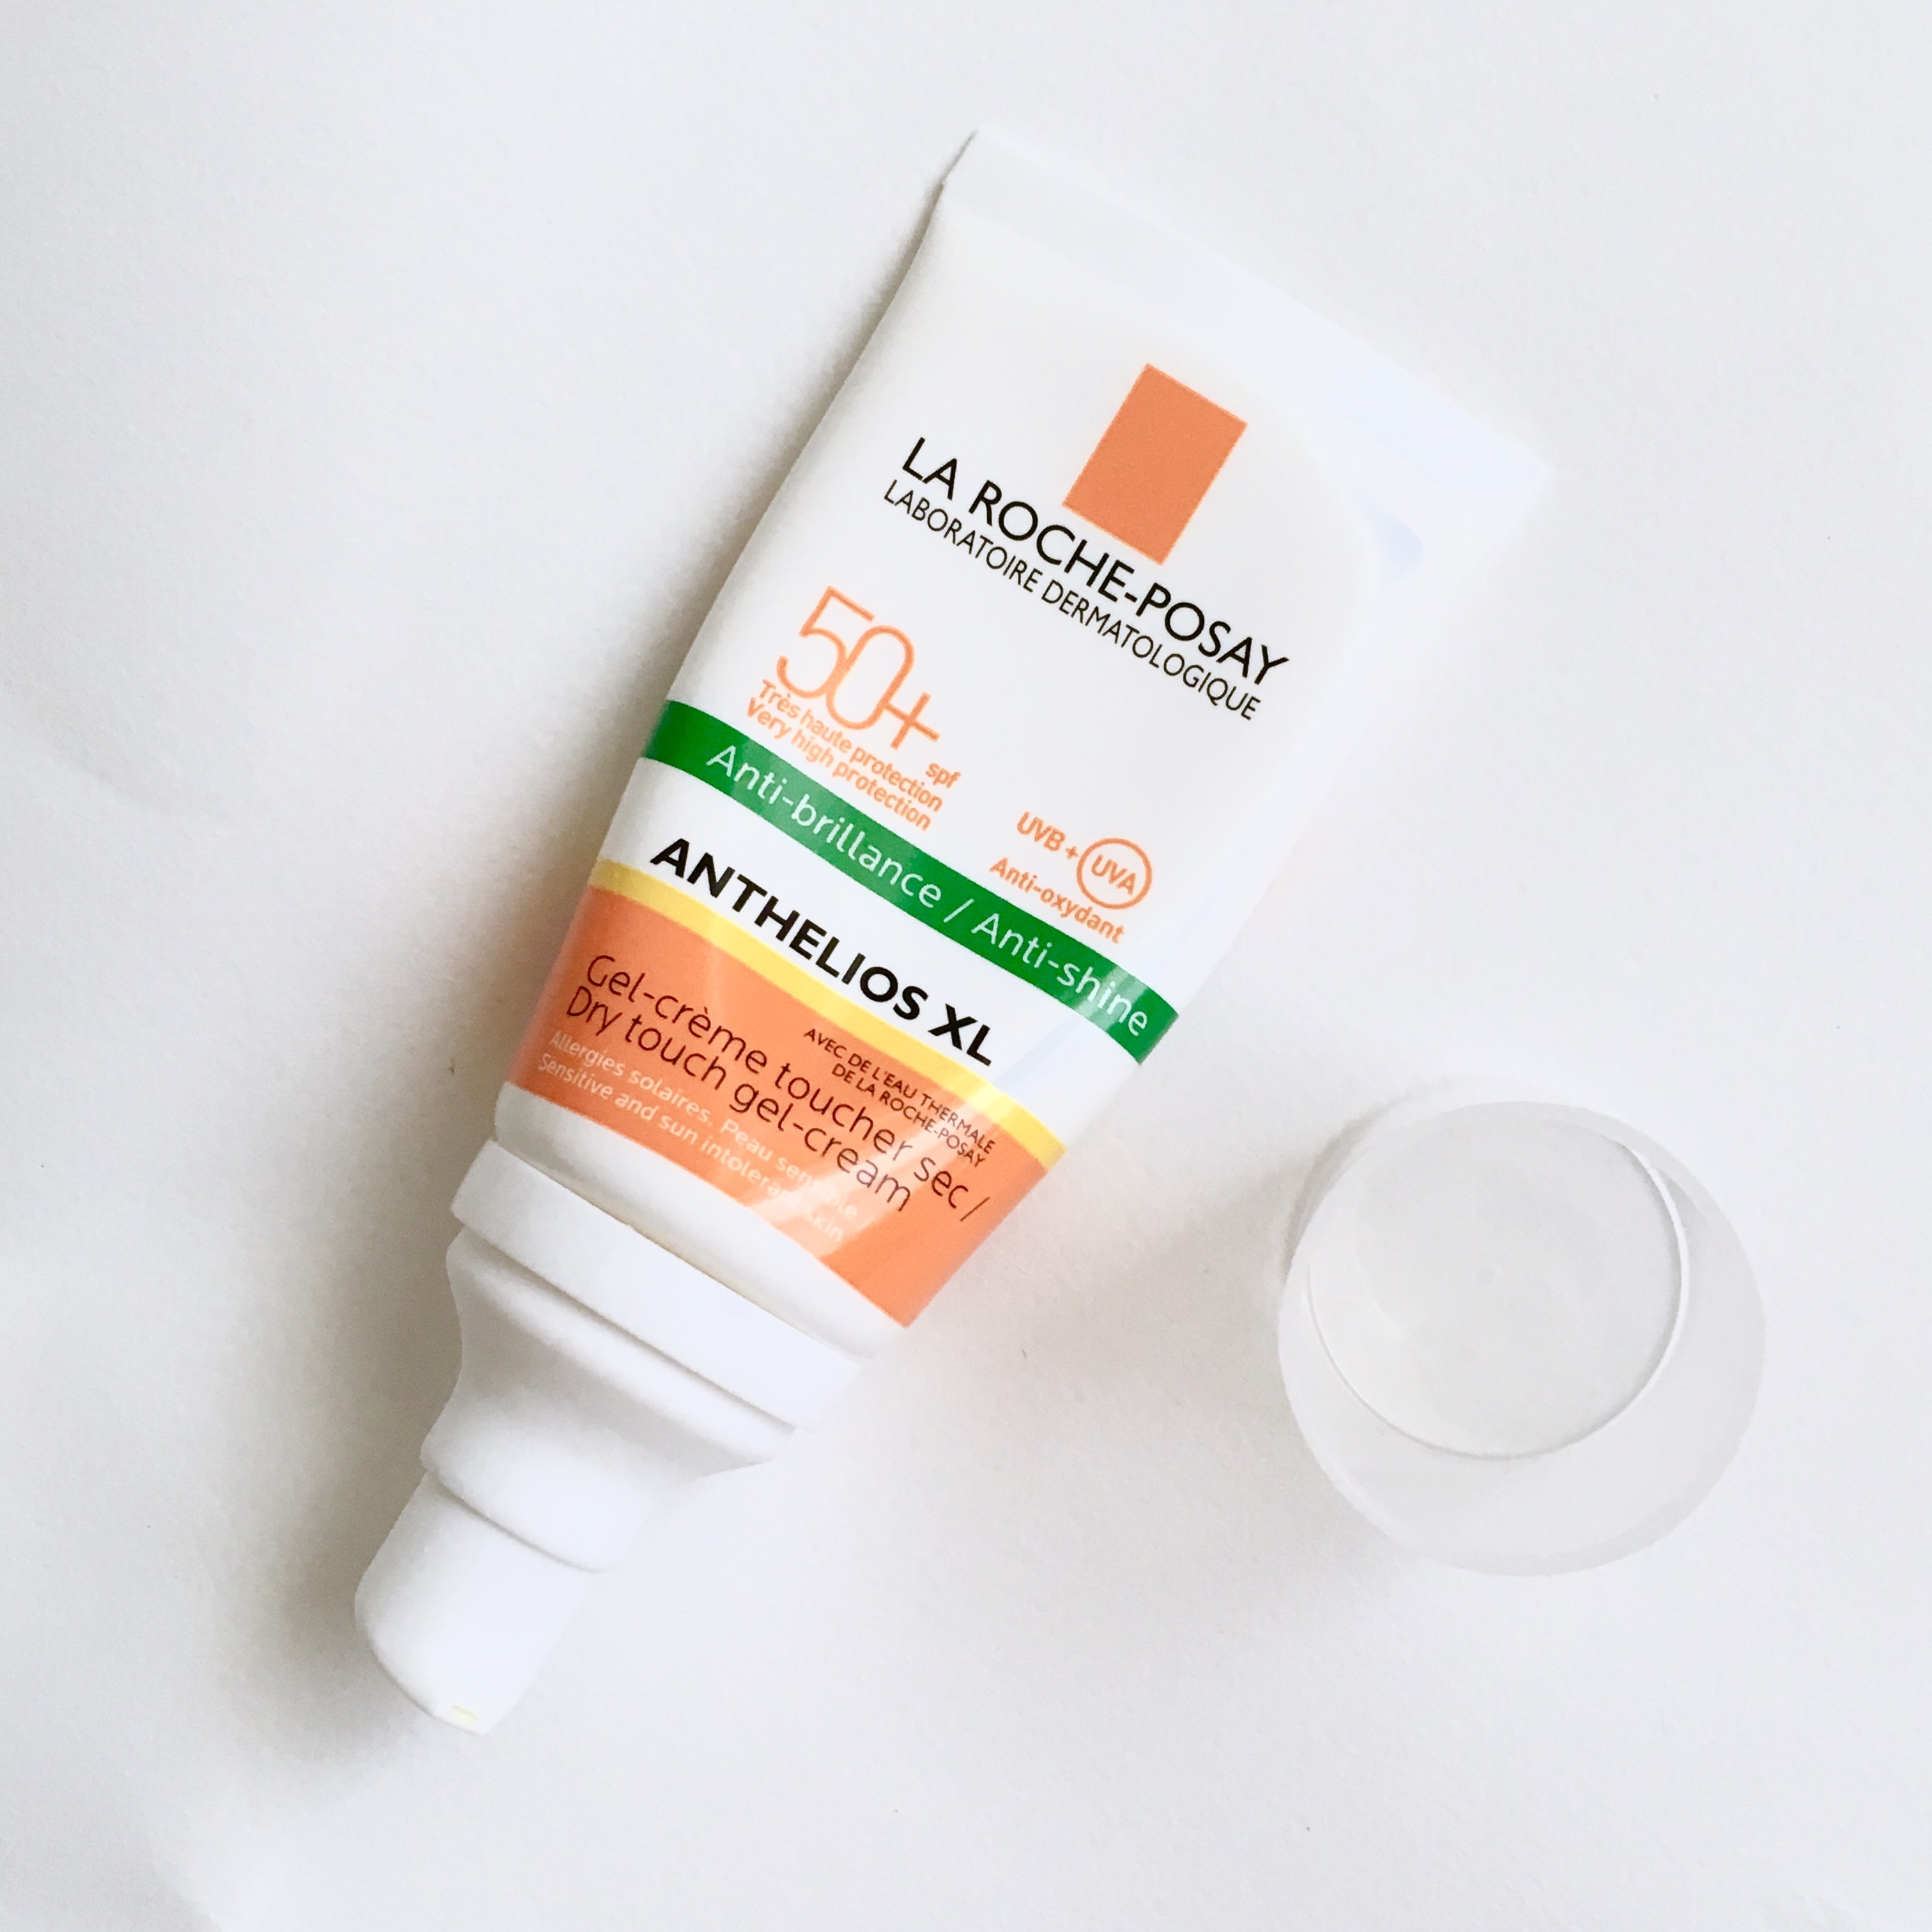 How to Understand Your Sunscreen Label – Wishtrend